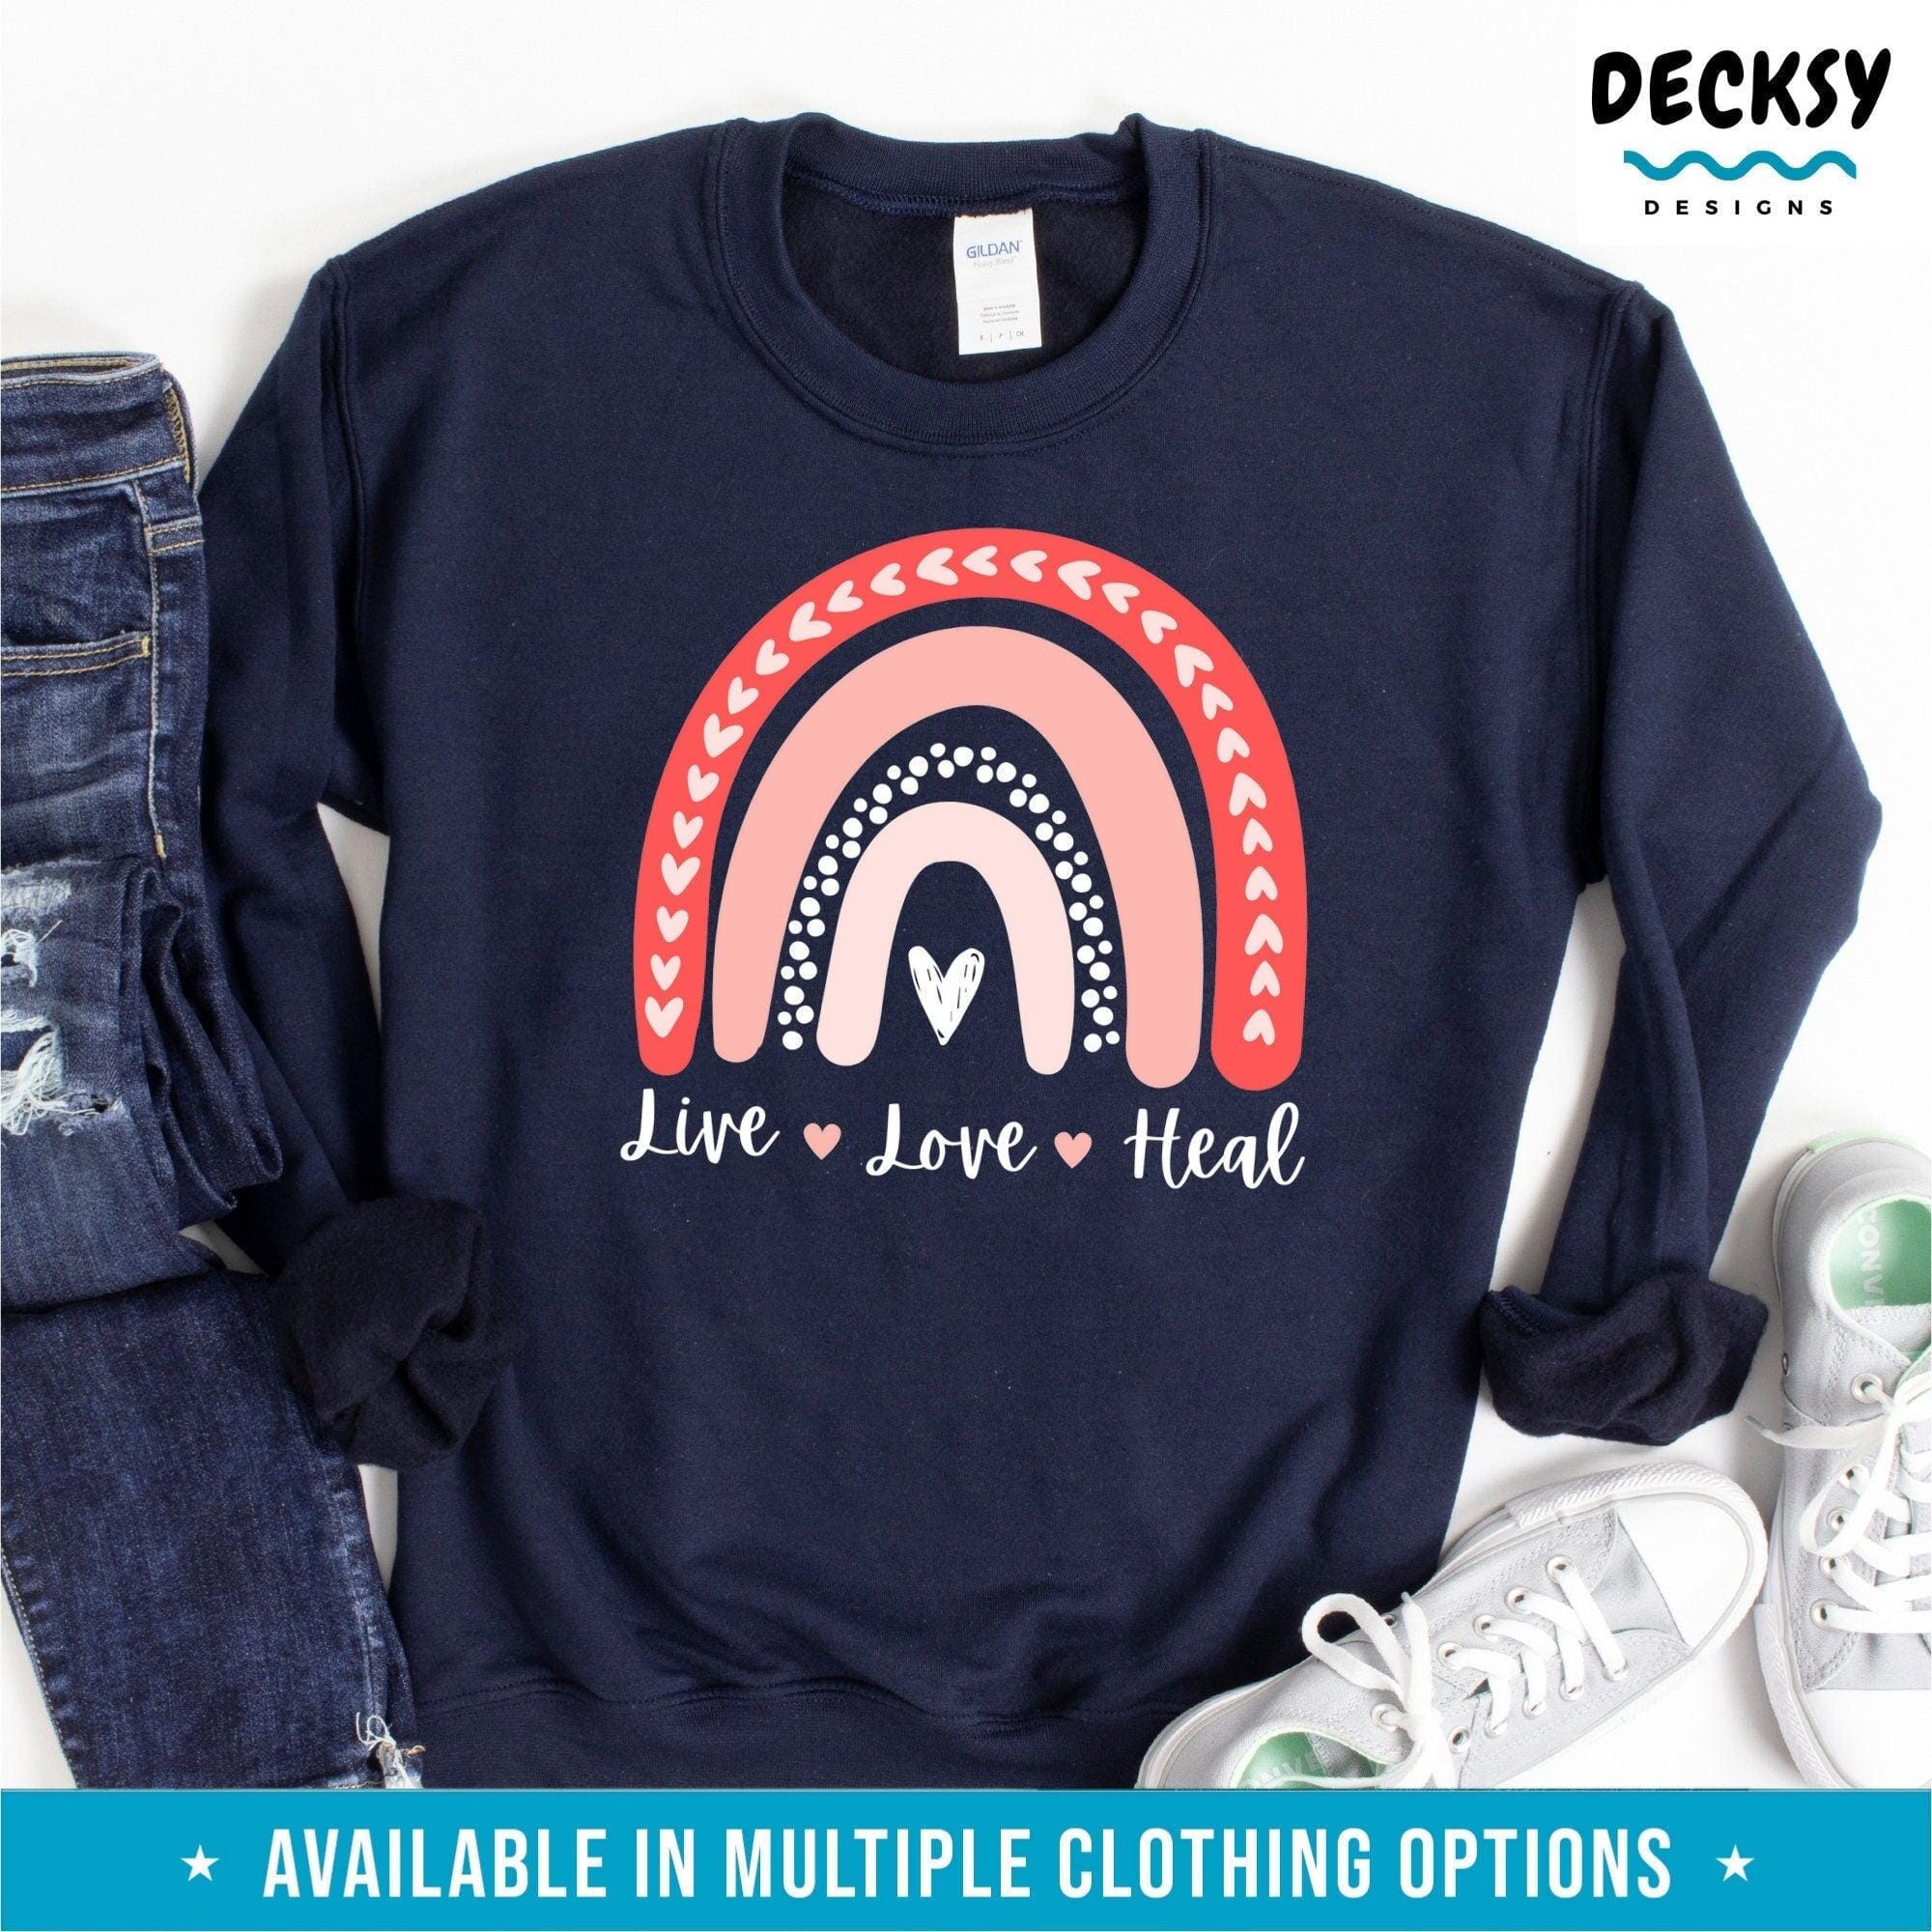 Live Love Heal Shirt, Mental Health Gift-Clothing:Gender-Neutral Adult Clothing:Tops & Tees:T-shirts:Graphic Tees-DecksyDesigns